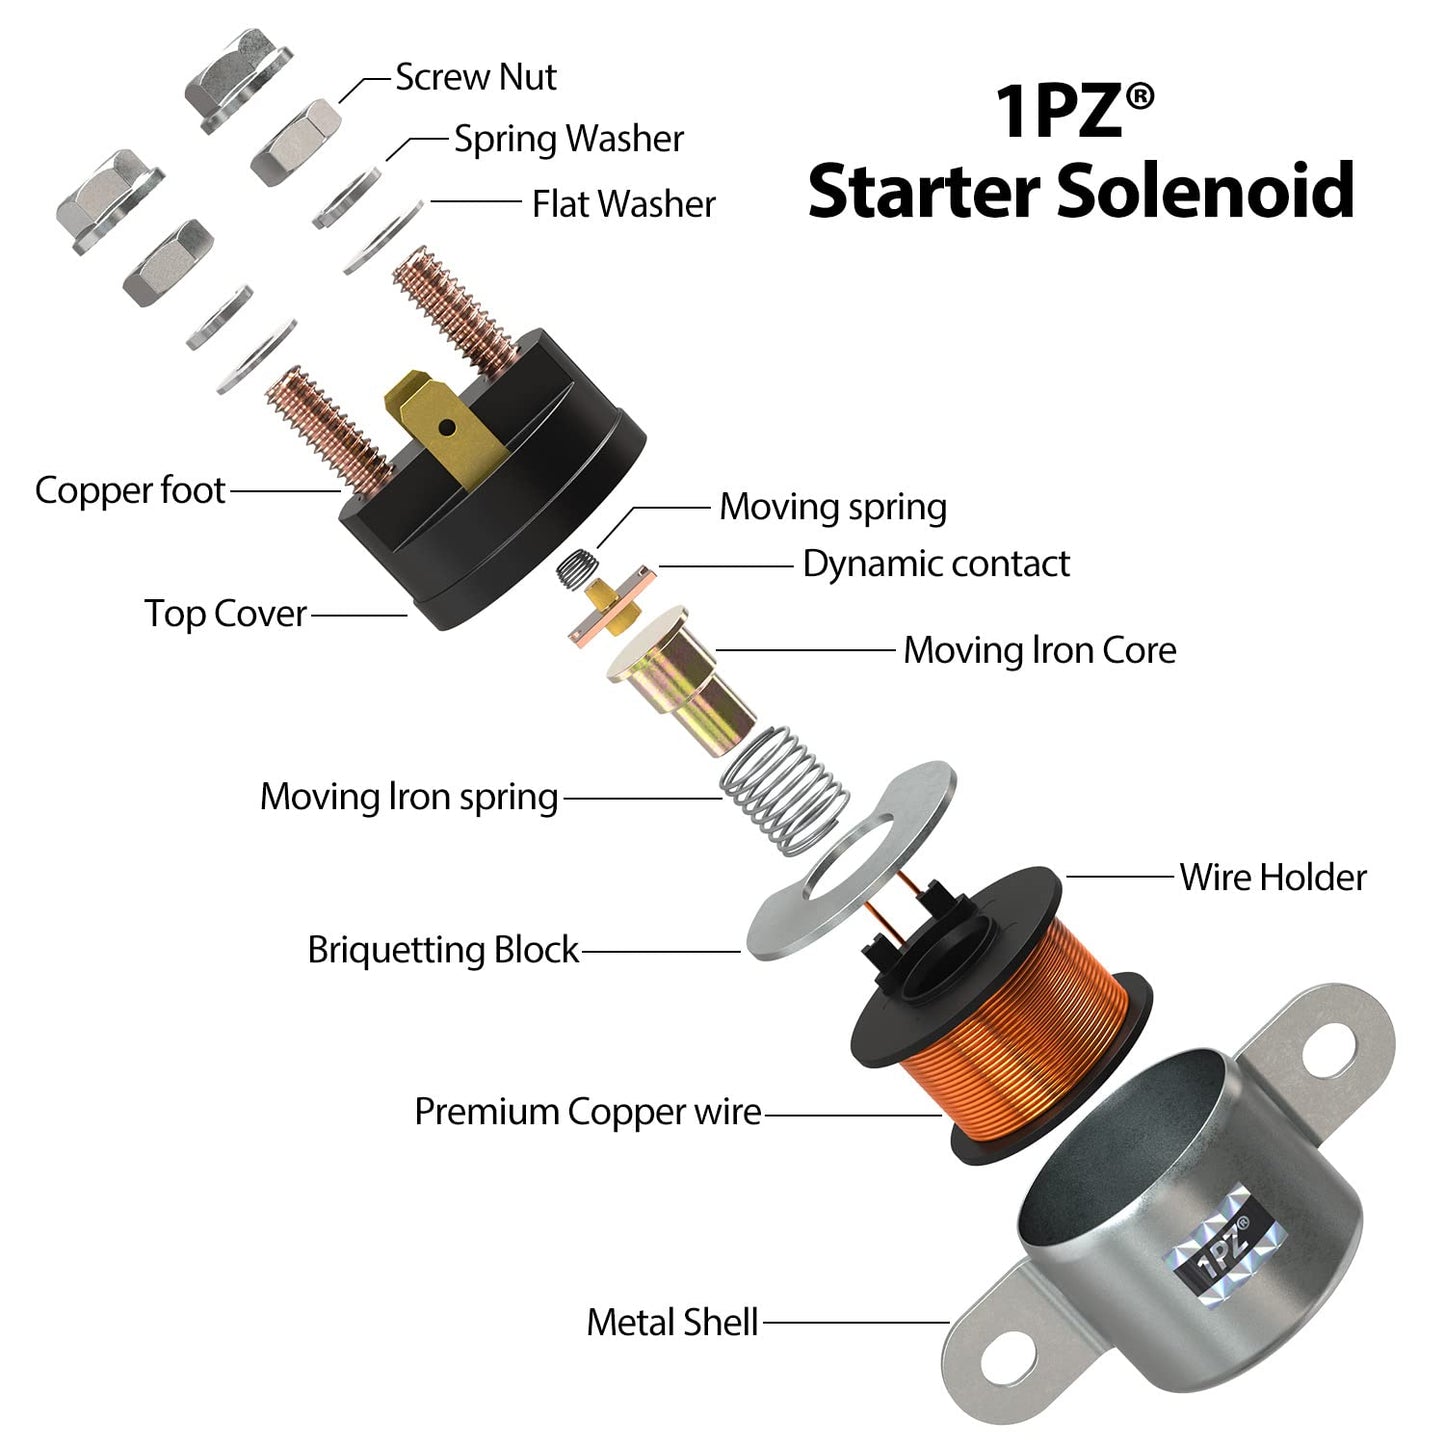 1PZ CM1-BS1 Starter Solenoid Relay Replacement for Can Am Bombardier Outlander Renegade 400 500 650 1000 710-001-364 710-000-111 710-000-252 515-176-011 182800-3760 182800-4050